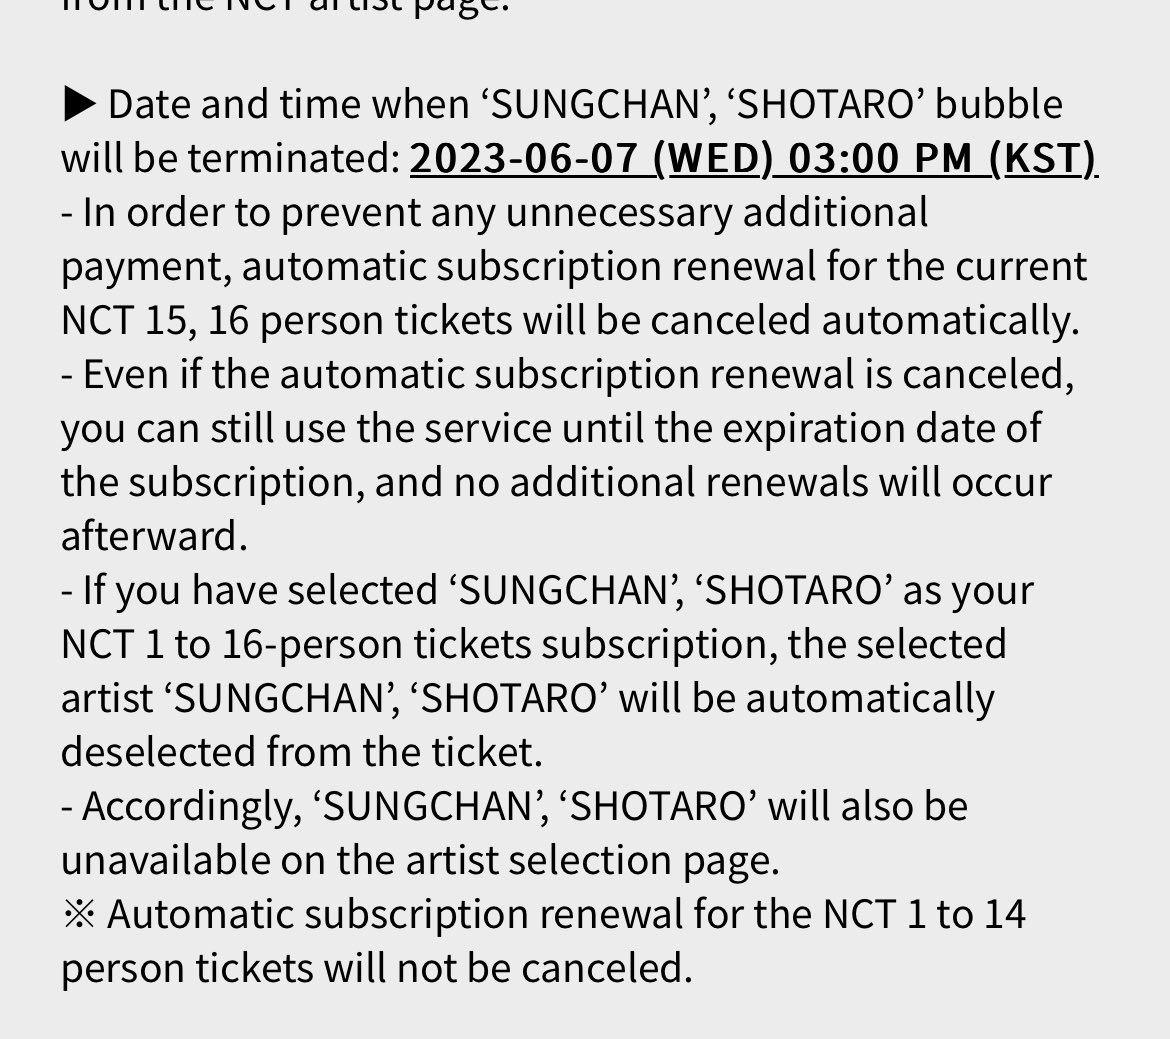 shotaro's and sungchan's bubble will be terminated on the 7th of June 🥲🥲🥲